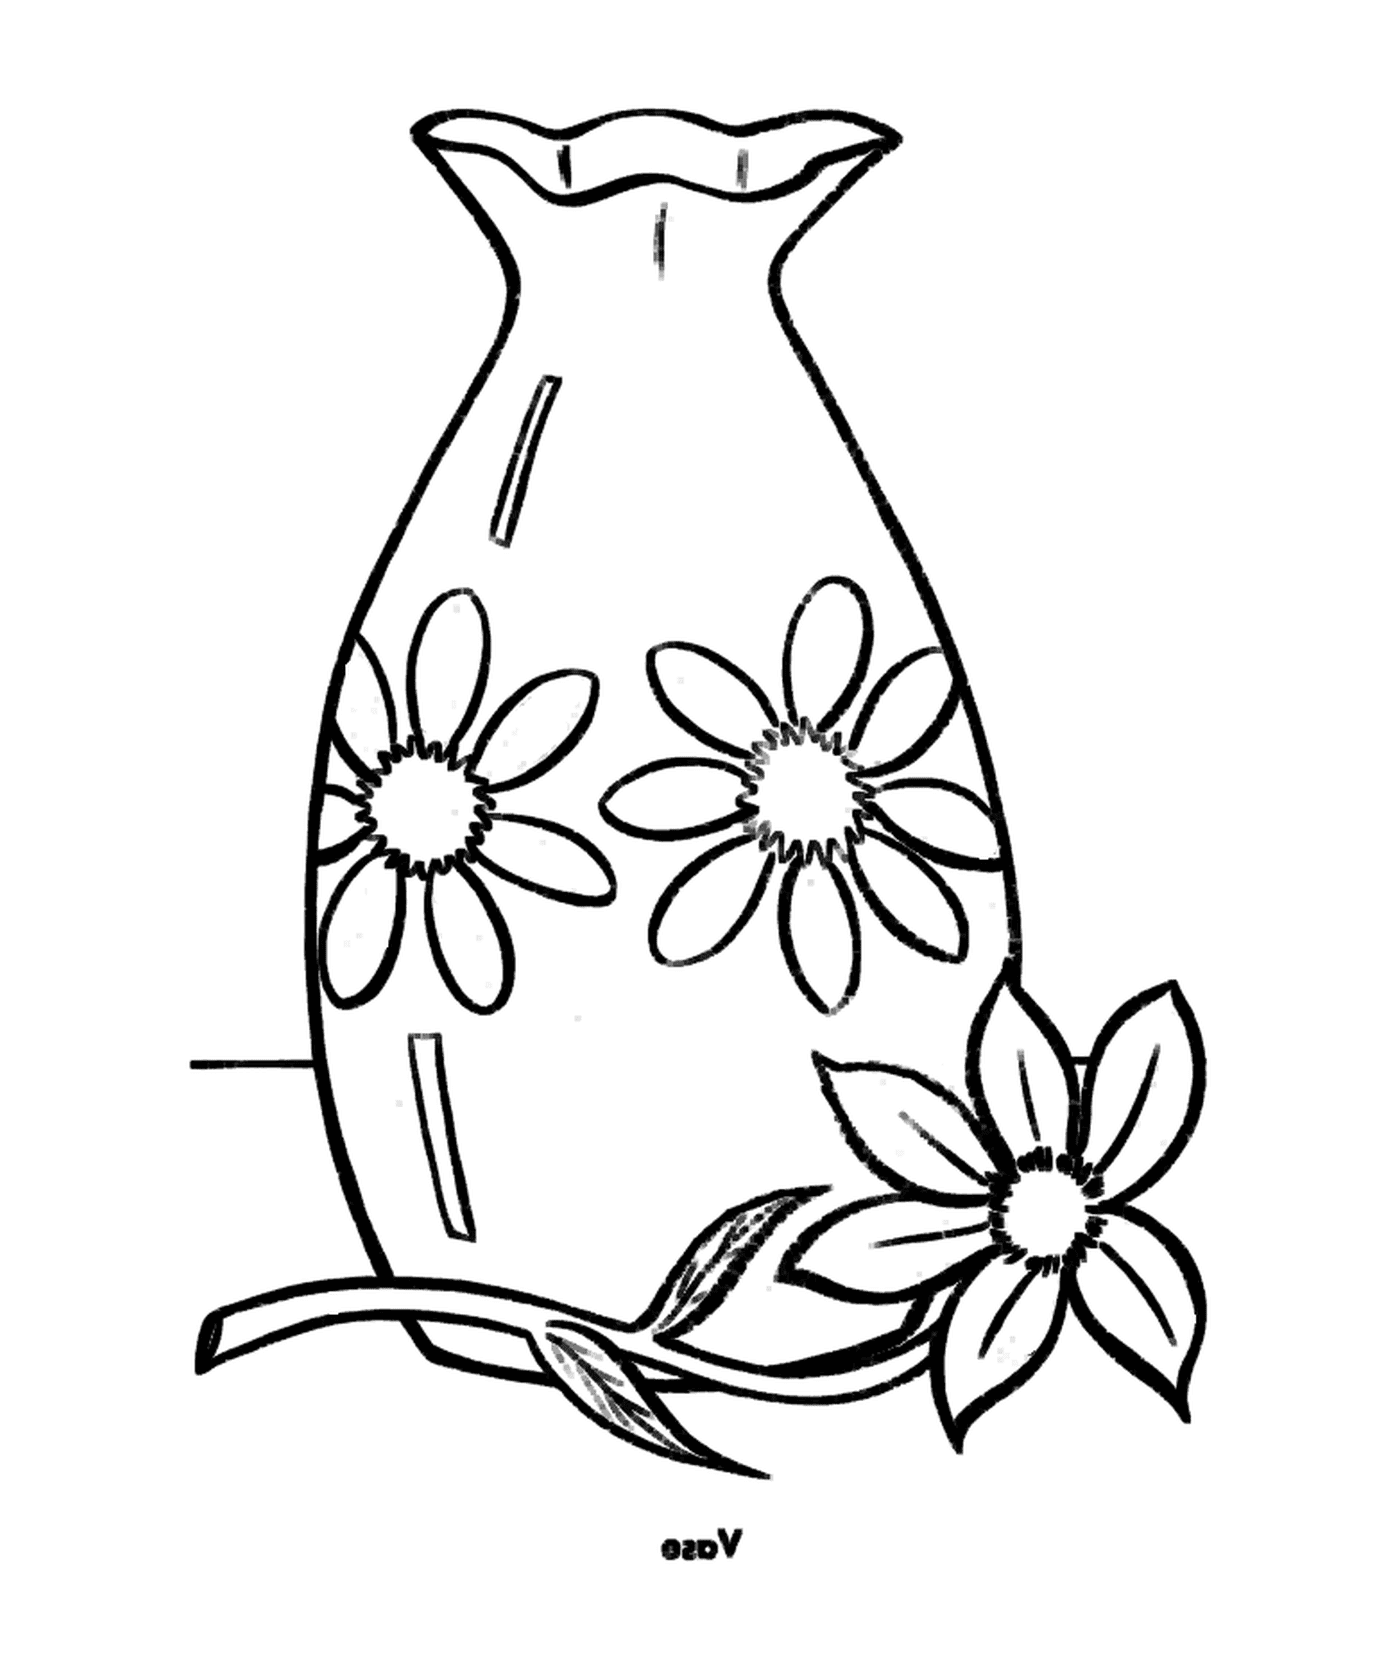  A vase with flowers 